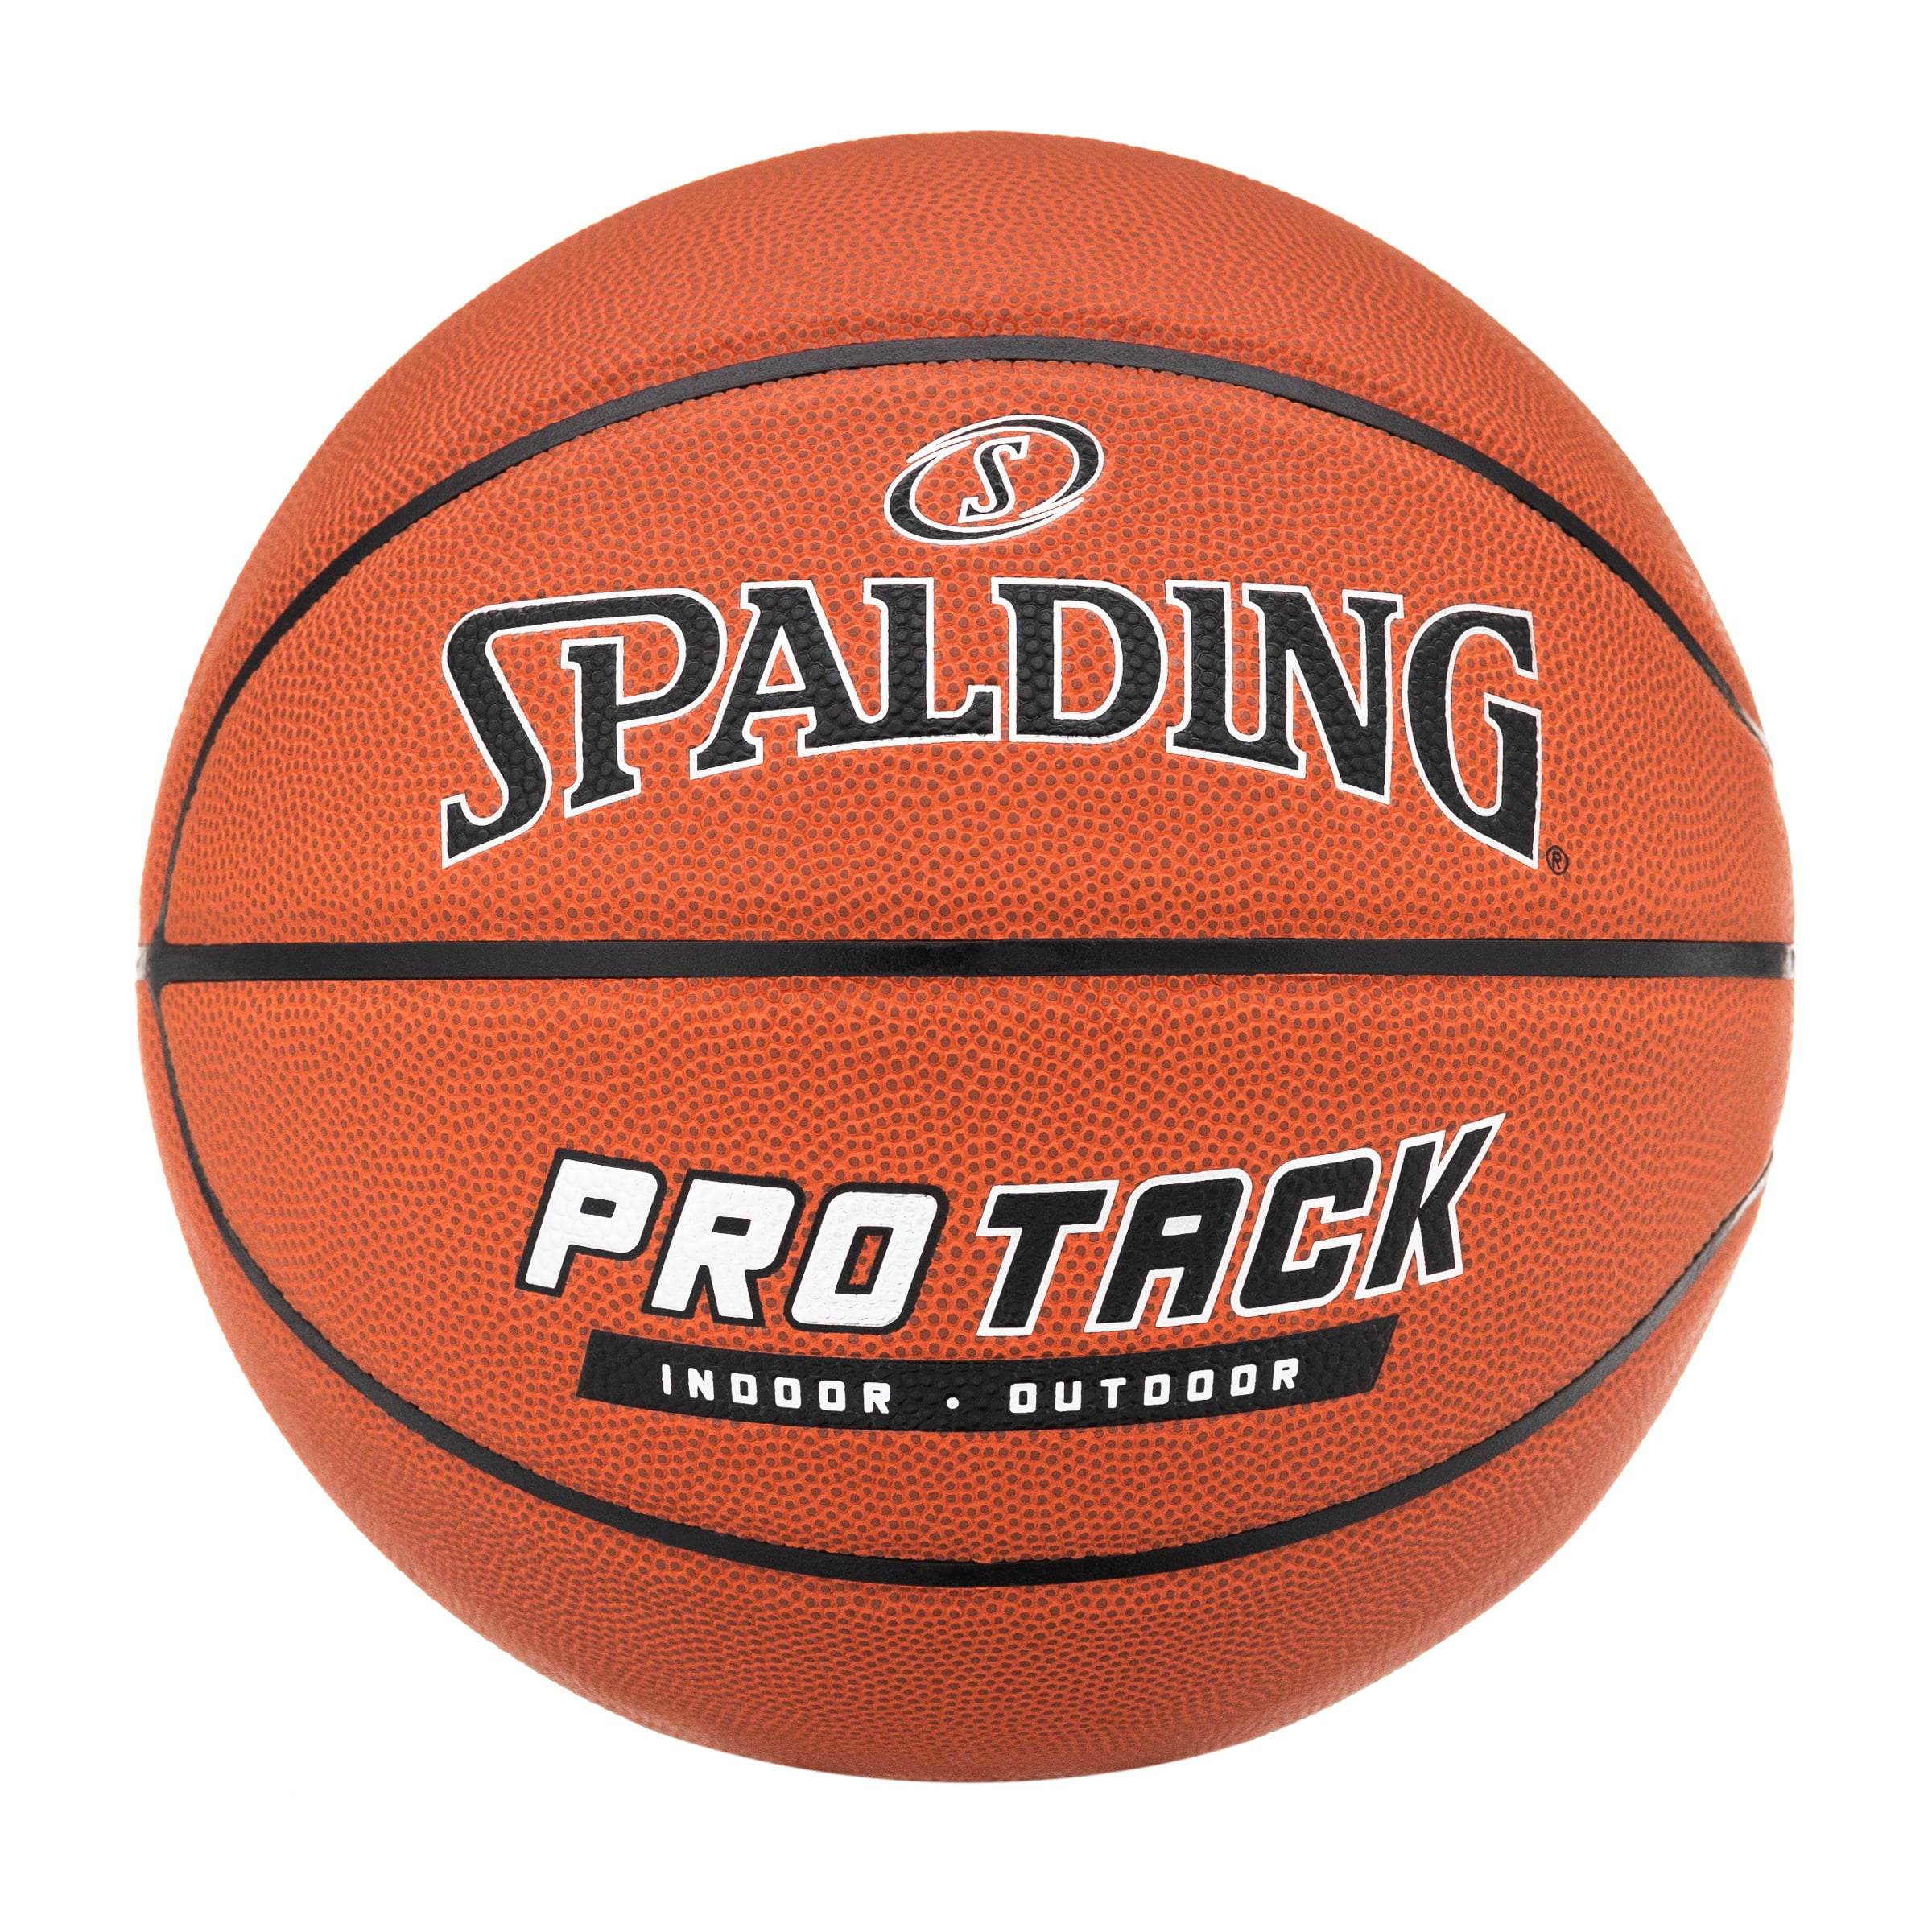 Spalding TF-250 Basketball Suitable For Indoor or Outdoor Use Intermediate,28.5 